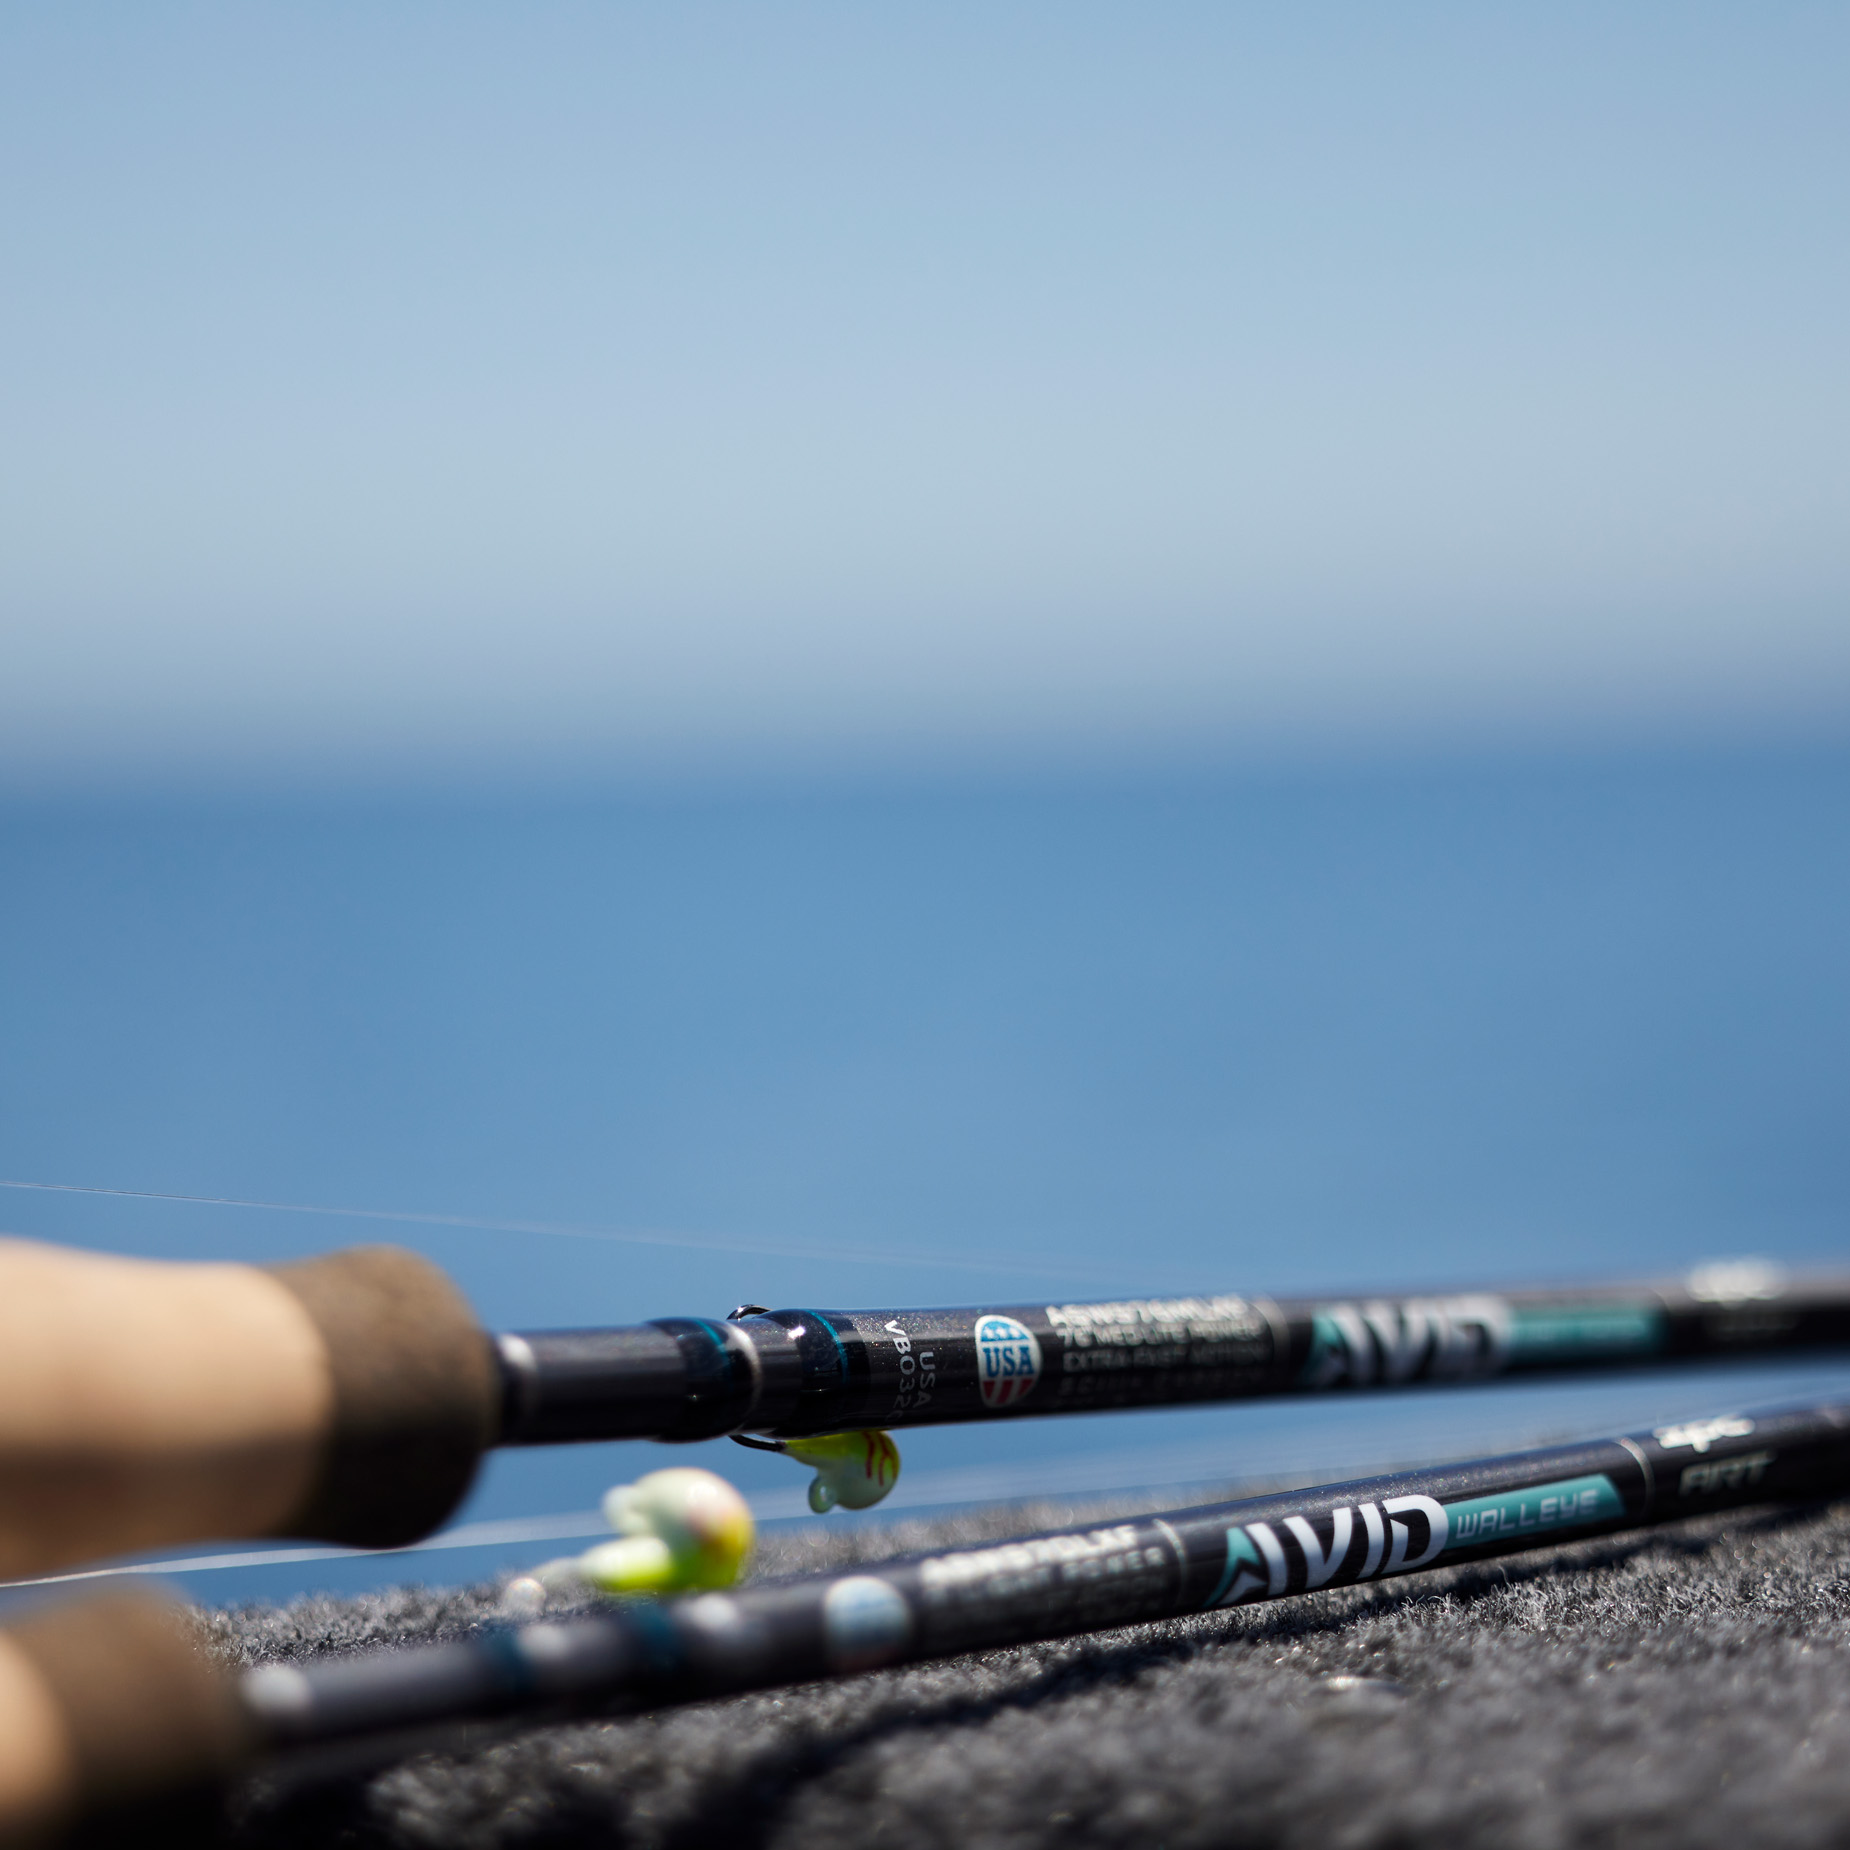 St. Croix Avid Series Walleye Spinning Rods